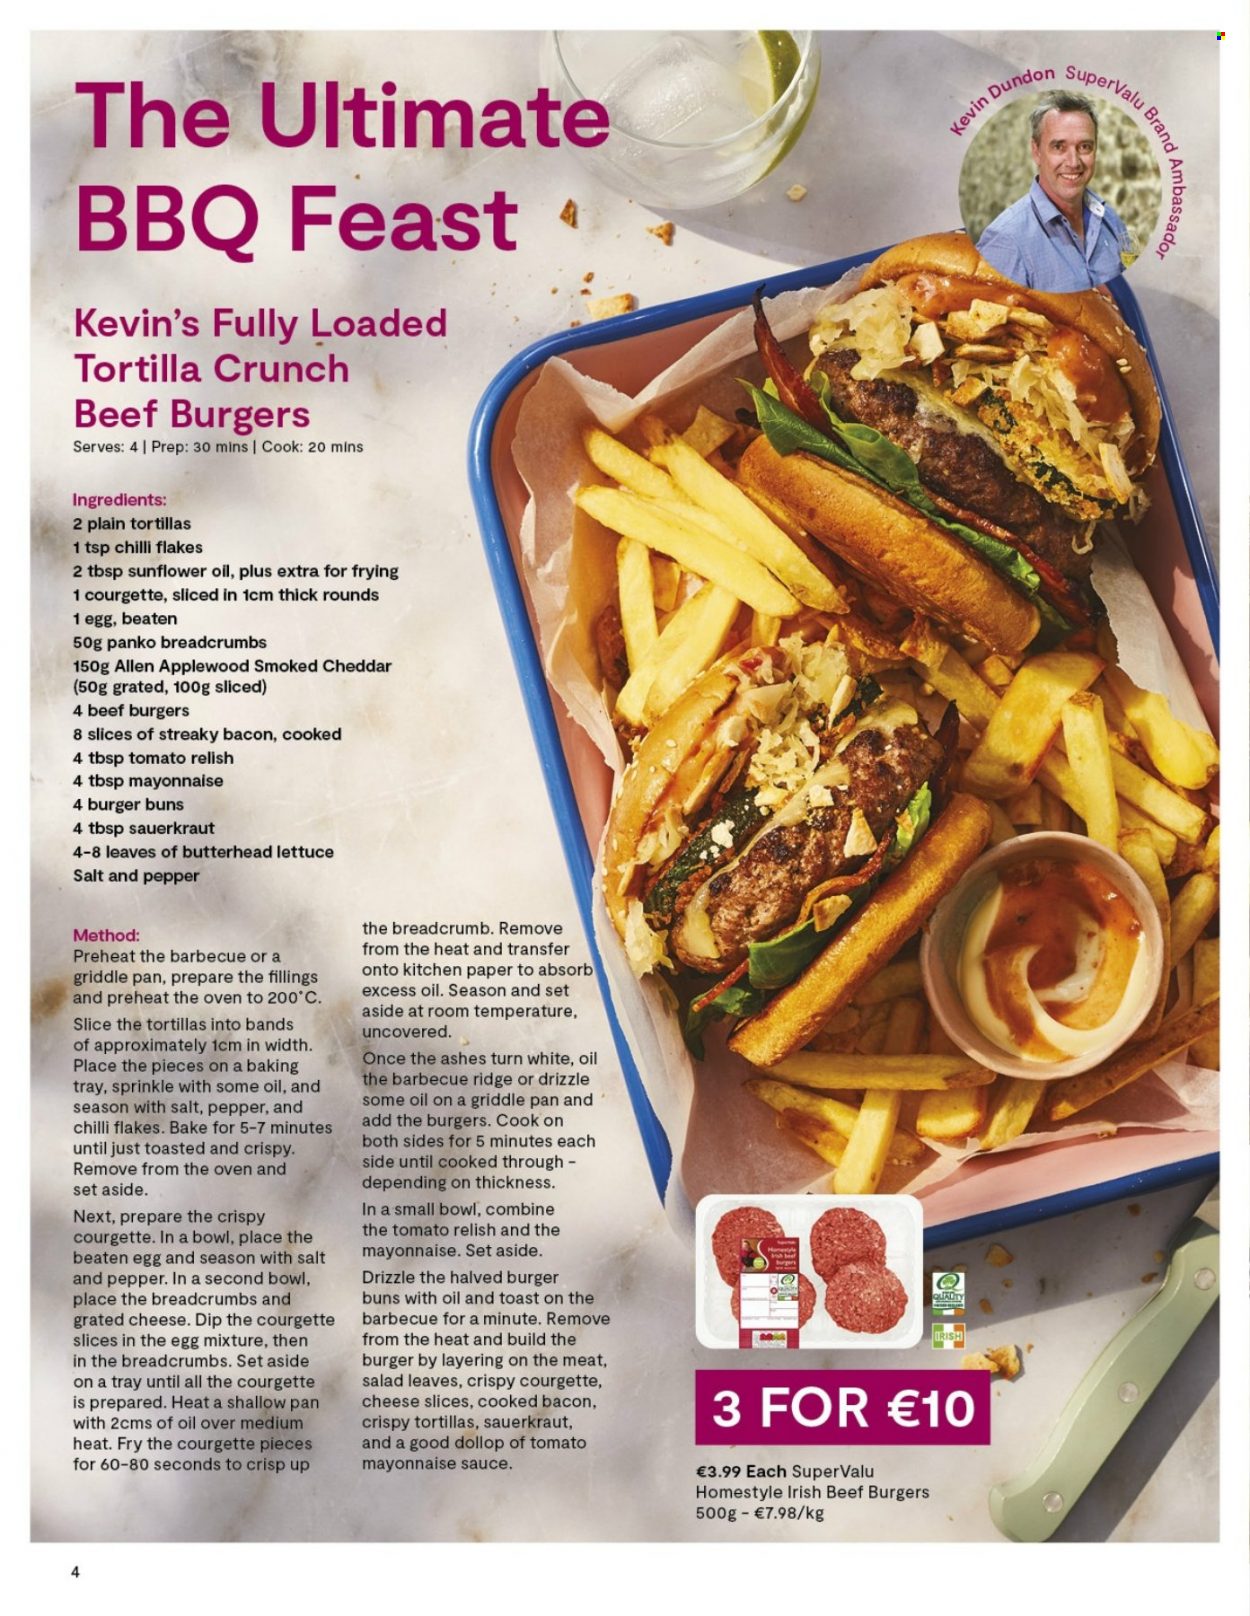 thumbnail - SuperValu offer  - Sales products - tortillas, buns, burger buns, panko breadcrumbs, beef burger, bacon, streaky bacon, sliced cheese, cheddar, cheese, grated cheese, eggs, sauerkraut, pepper, sunflower oil, paper. Page 4.